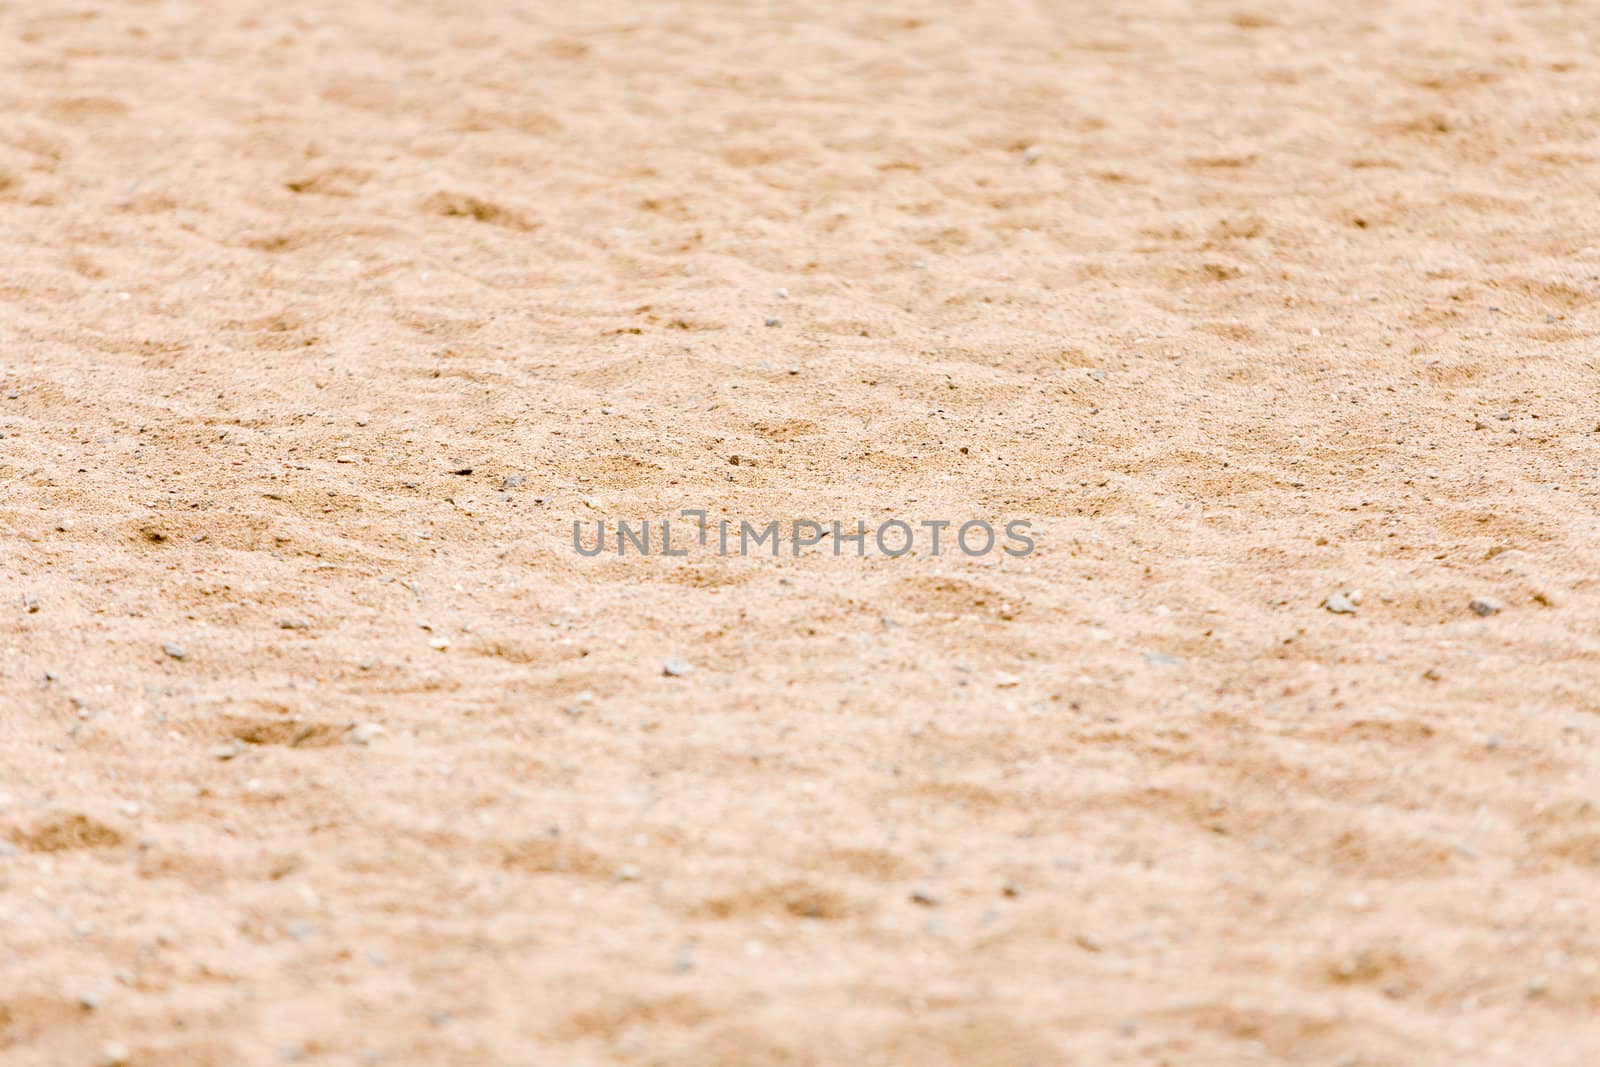 Texture and background image of sand